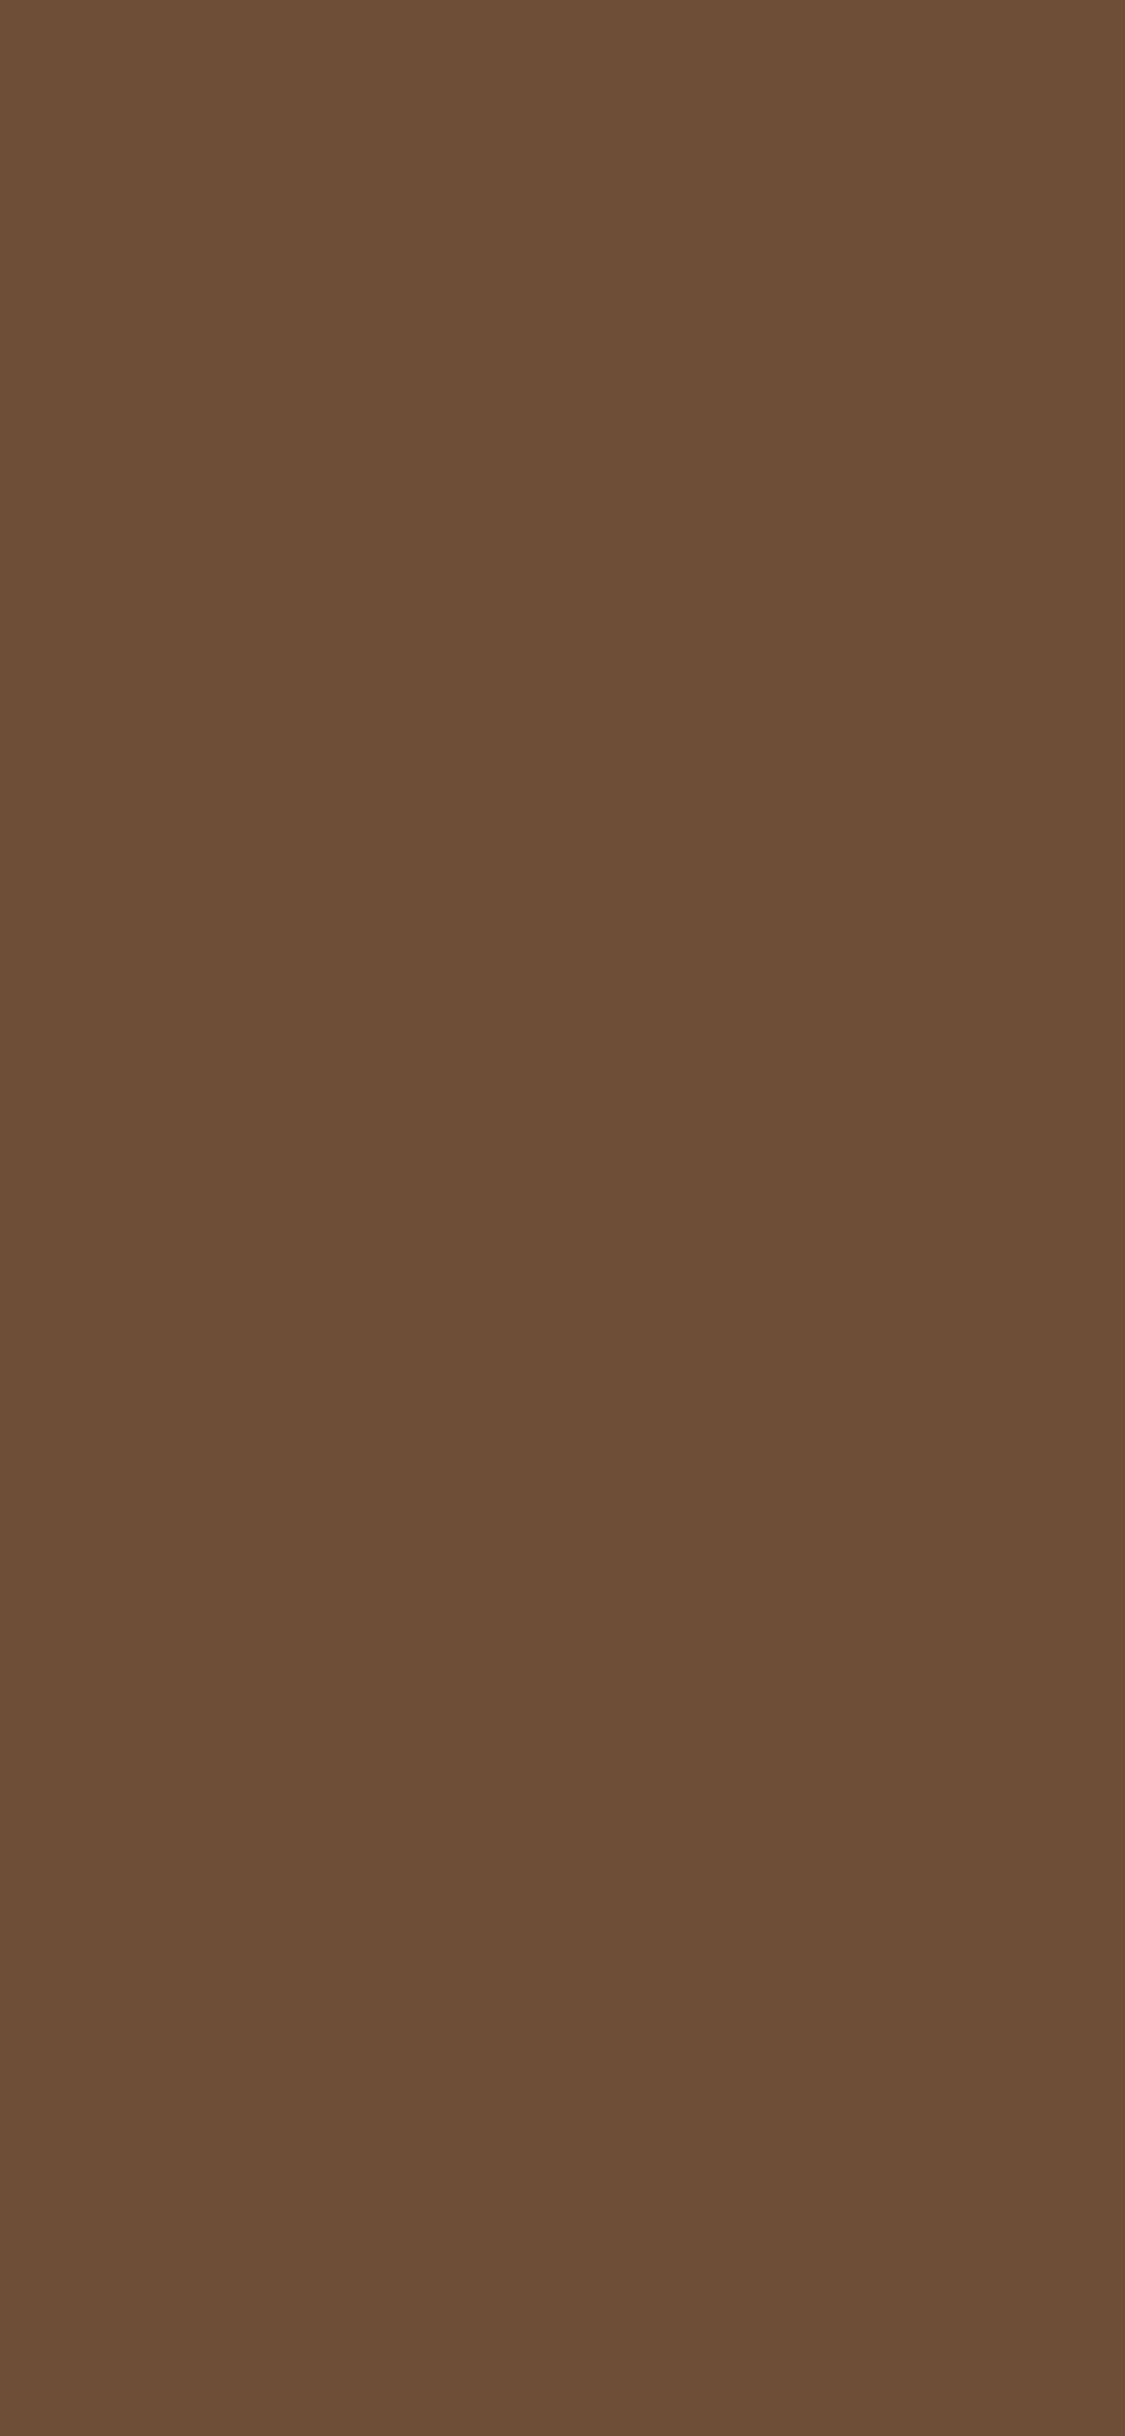 1125x2436 Coffee Solid Color Background